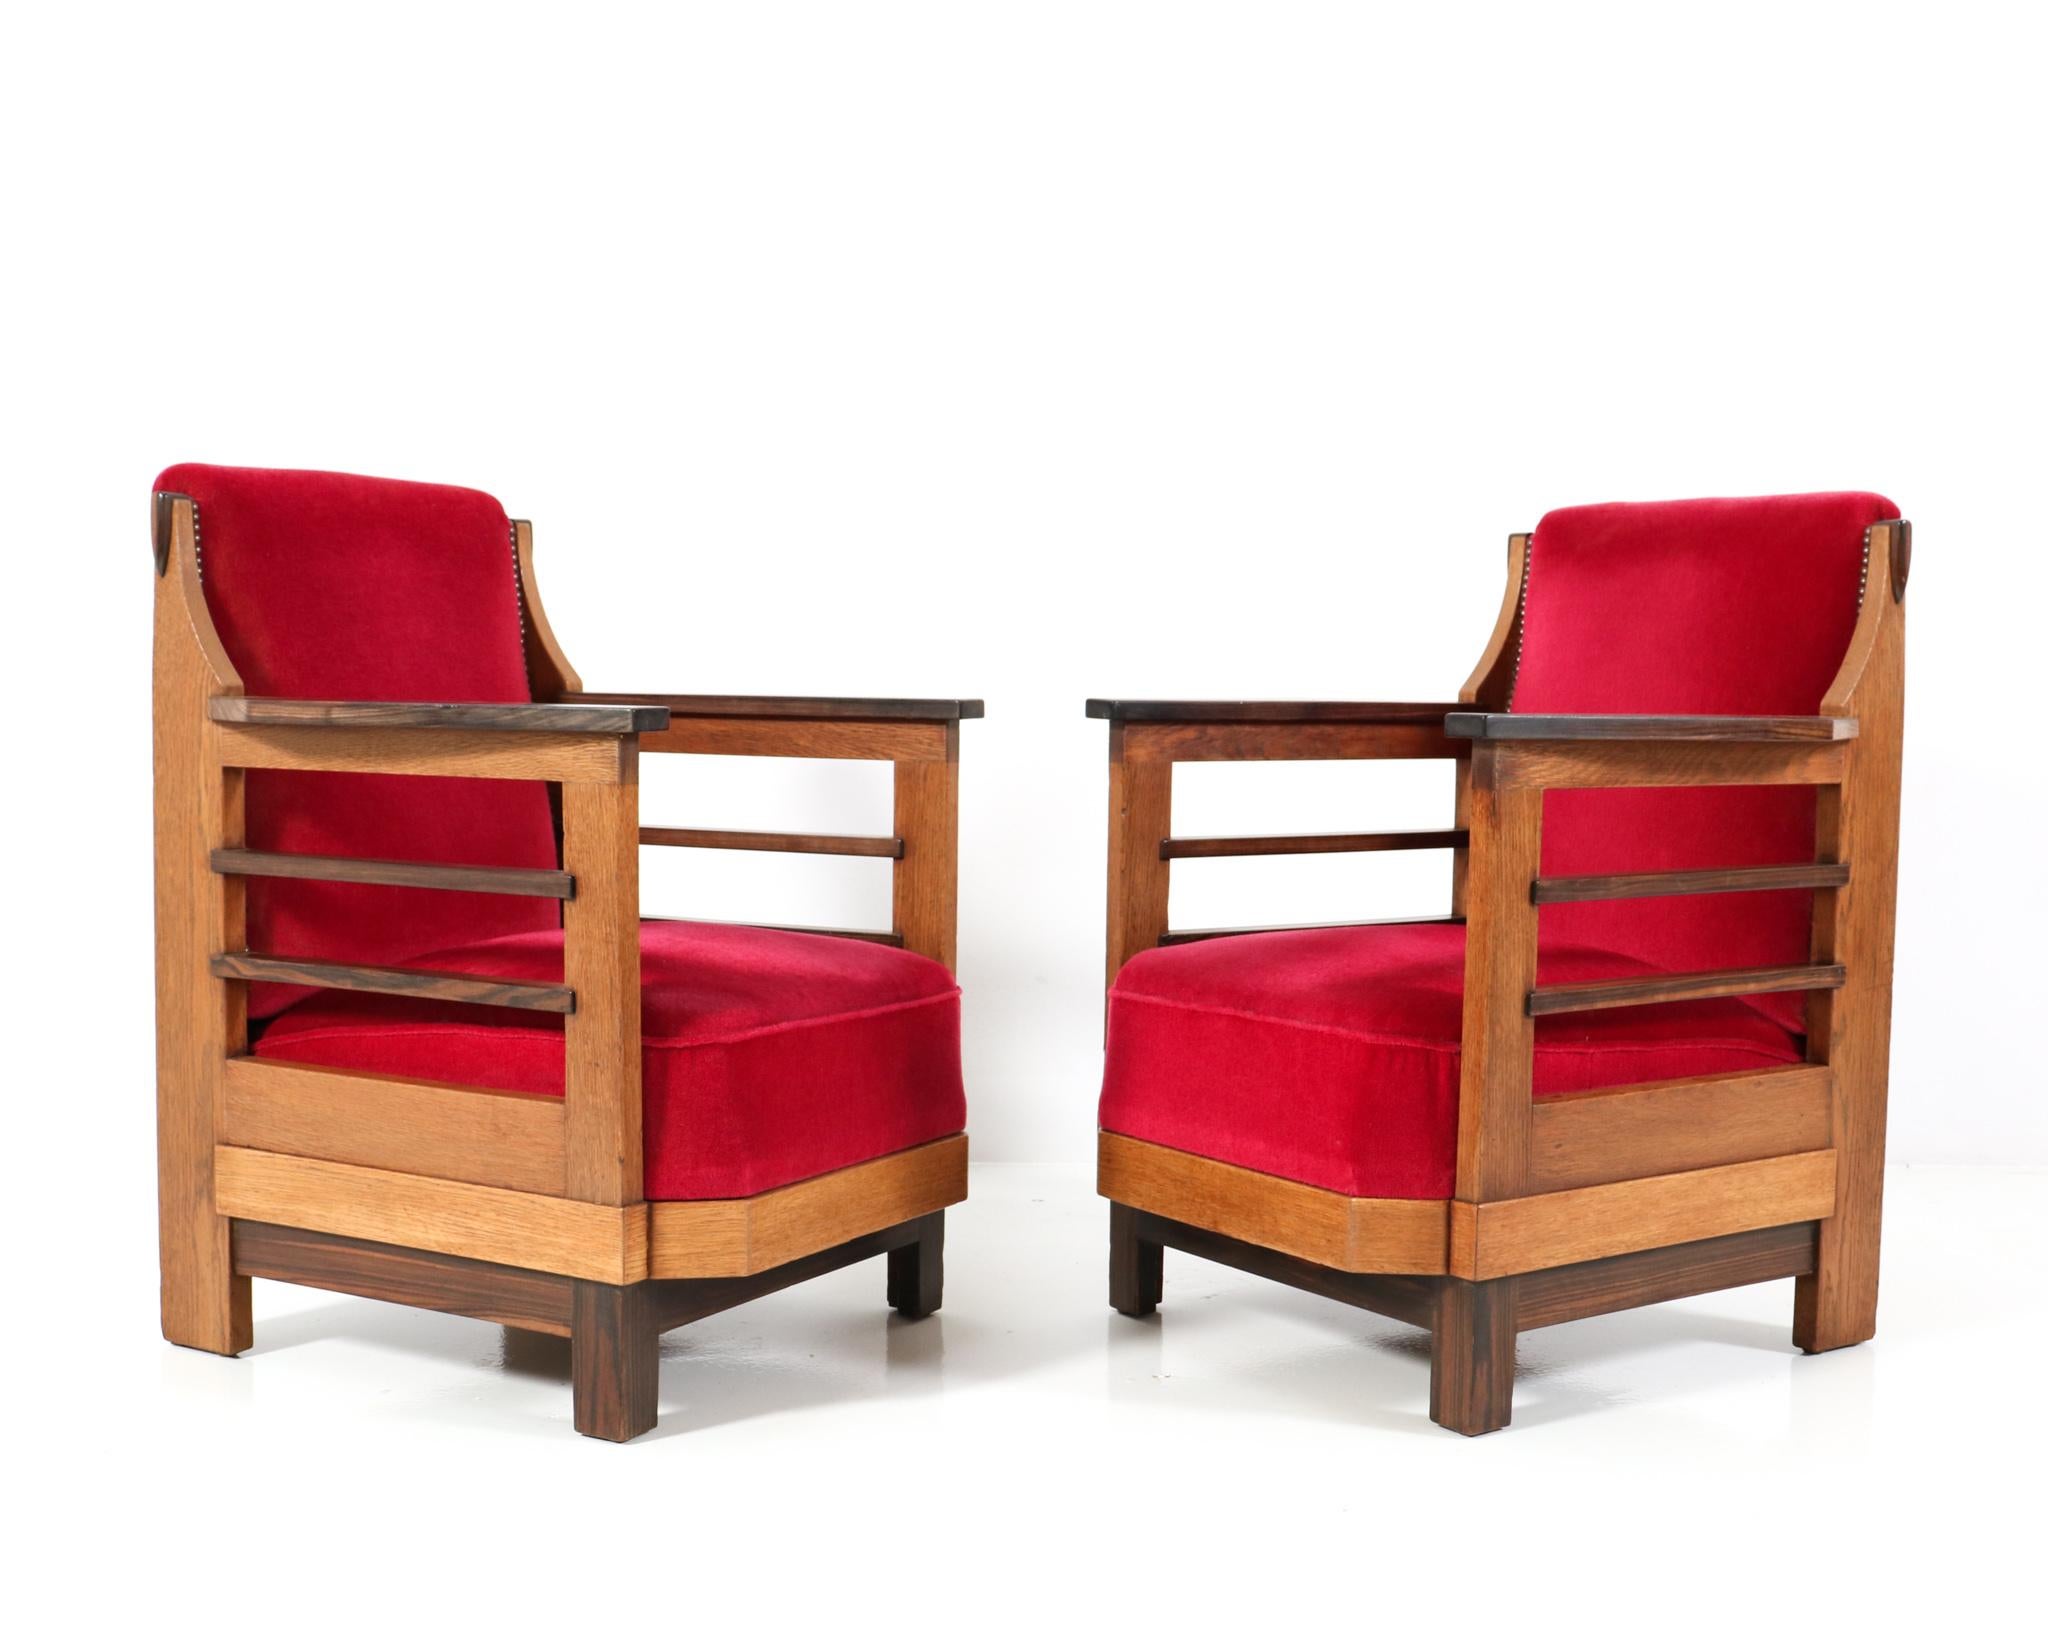 Dutch Pair of Art Deco Amsterdamse School Lounge Chairs by Anton Lucas Leiden, 1920s For Sale